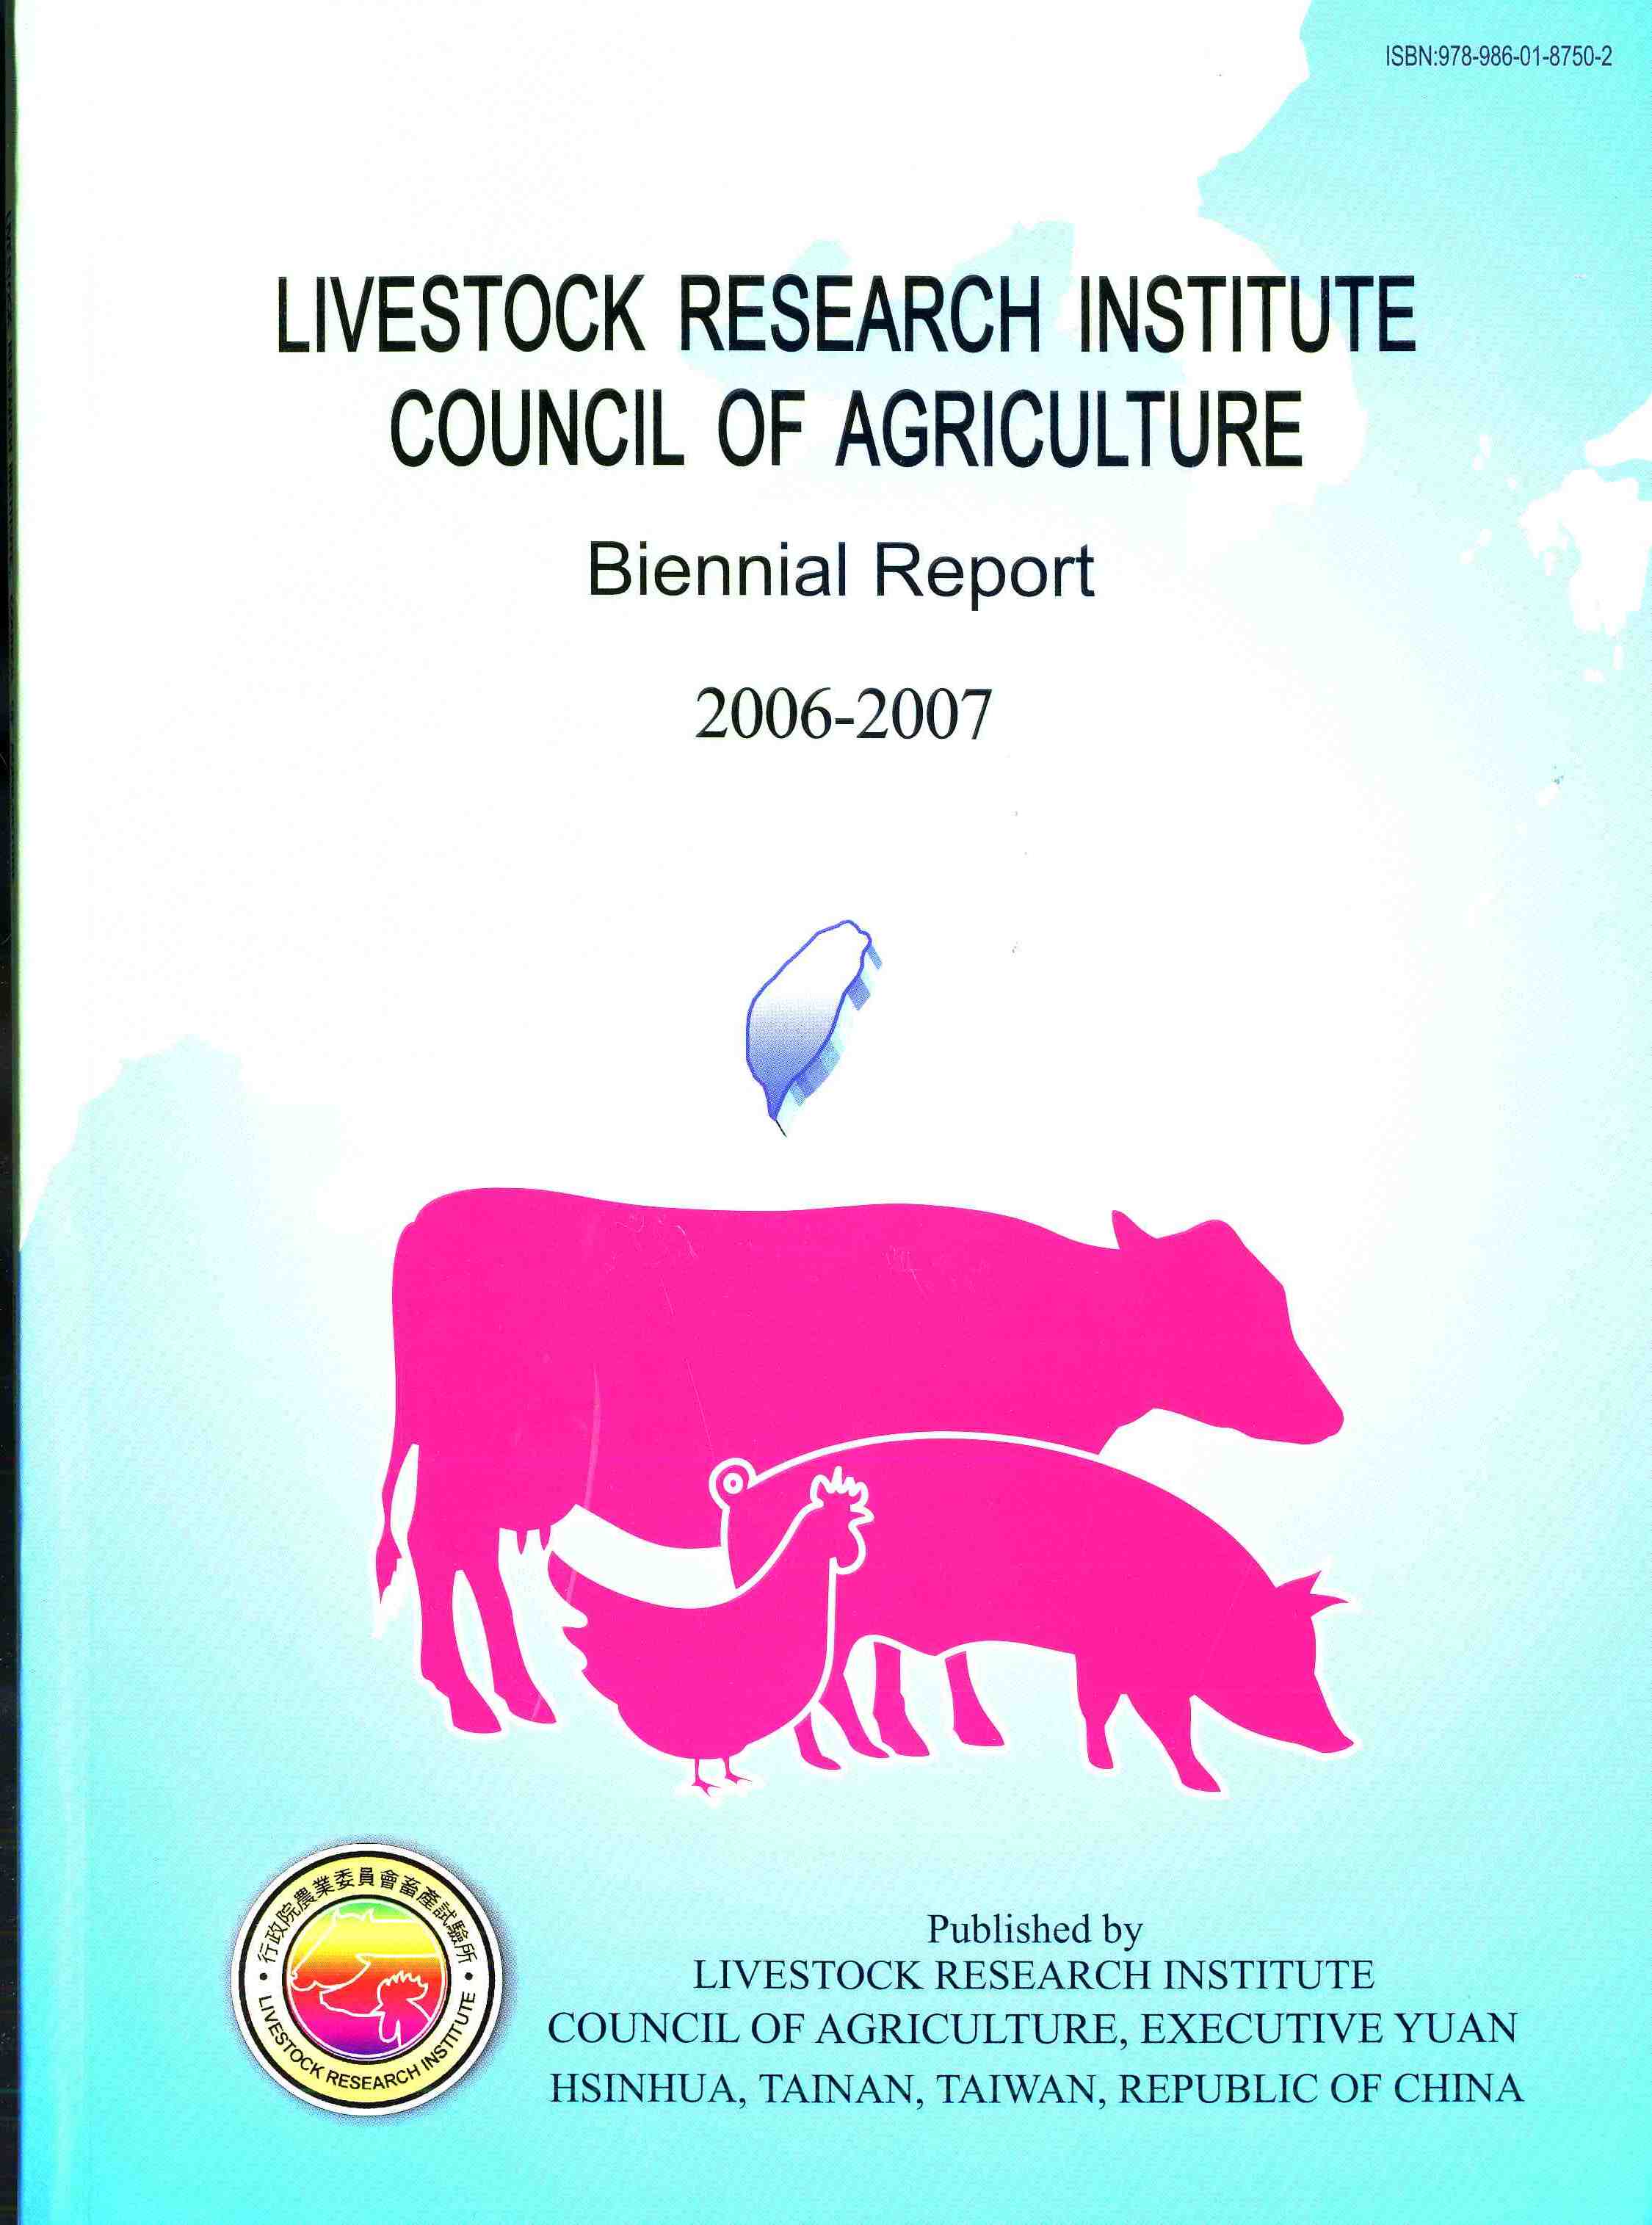 LIVESTOCK RESEARCH INSTITUTE COUNCIL OF AGRICULTURE Biennial Report 2006-2007